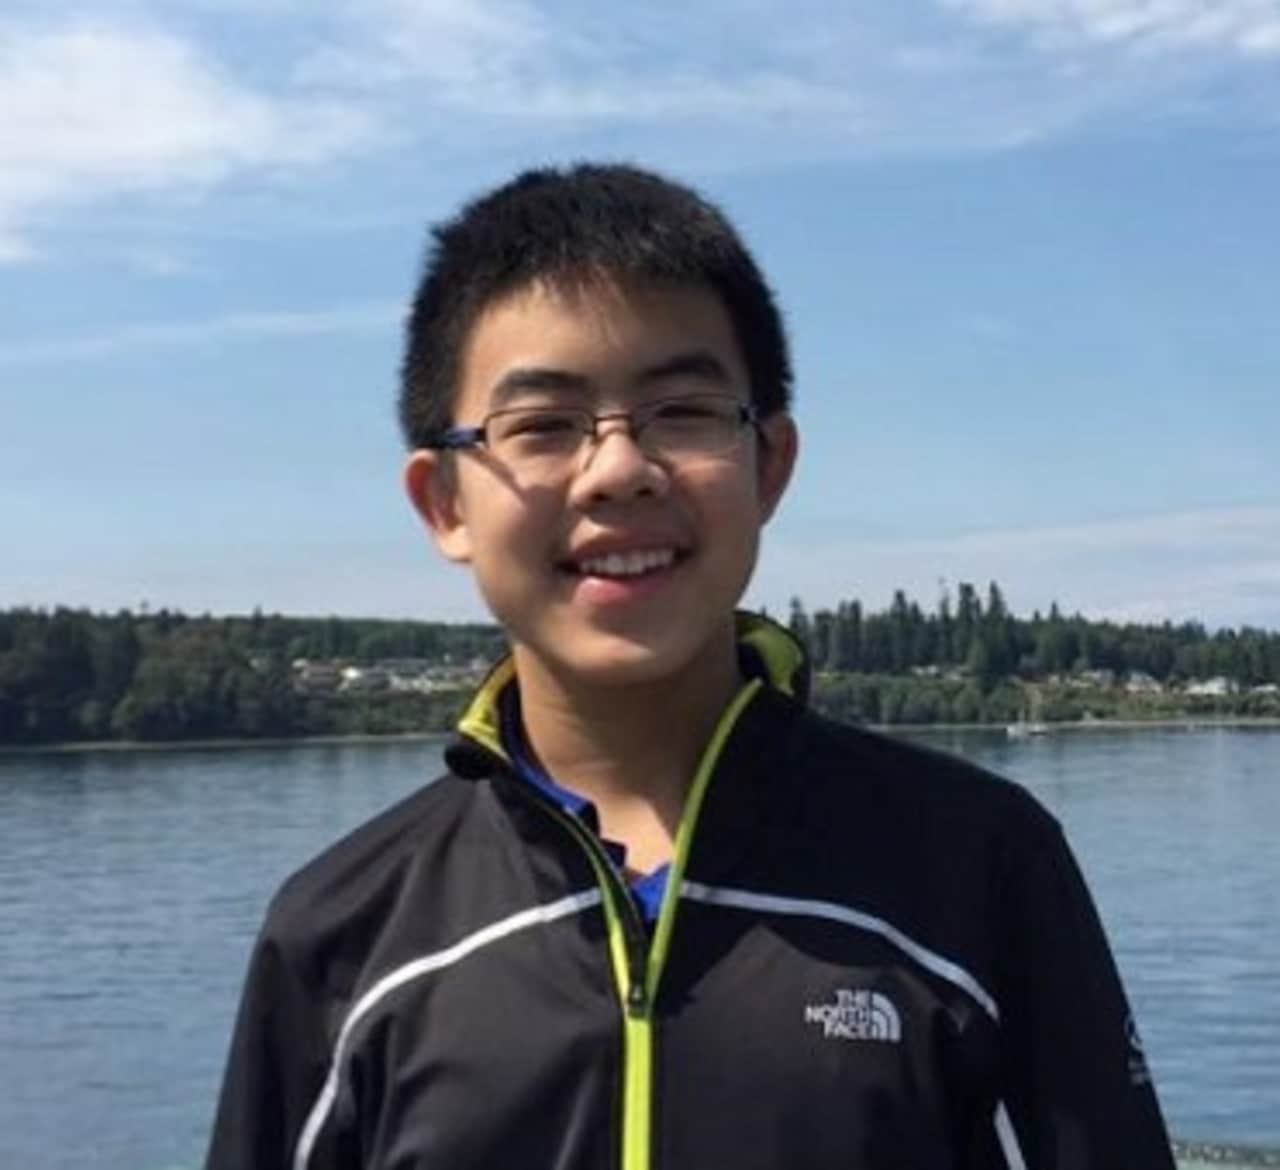 Richard Xu recently took top honors at a statewide competition by answering all 10 questions correctly in a tie-breaker round.